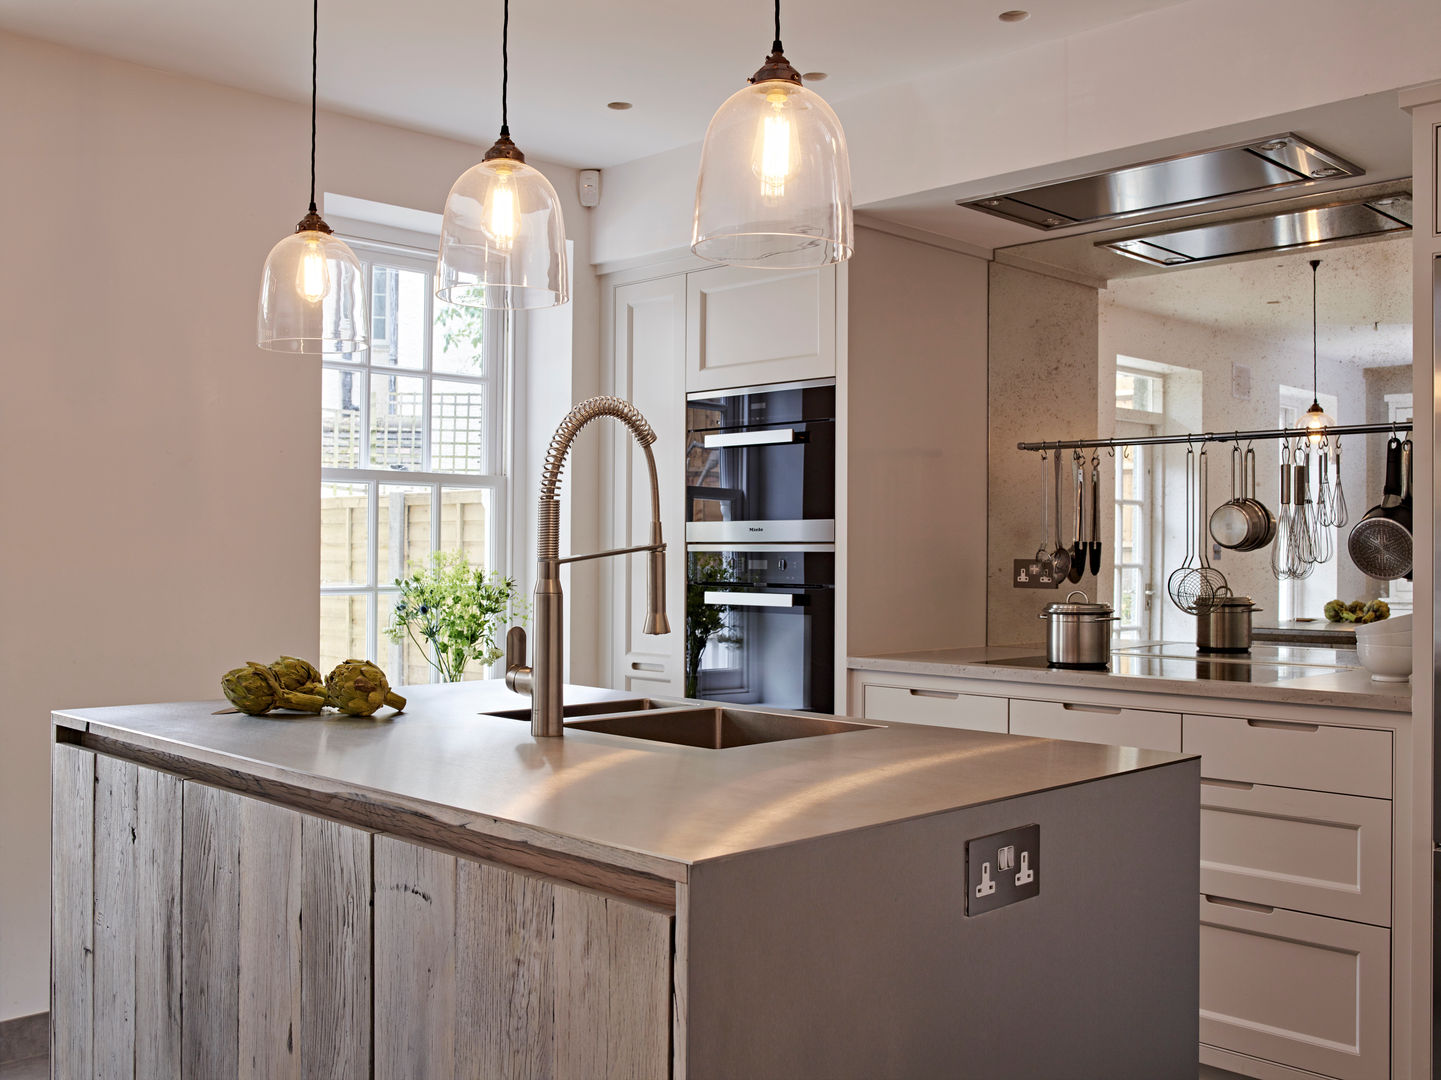 Kitchen design for small spaces, Holloways of Ludlow Bespoke Kitchens & Cabinetry Holloways of Ludlow Bespoke Kitchens & Cabinetry Industriale Küchen Holz Holznachbildung Beleuchtung